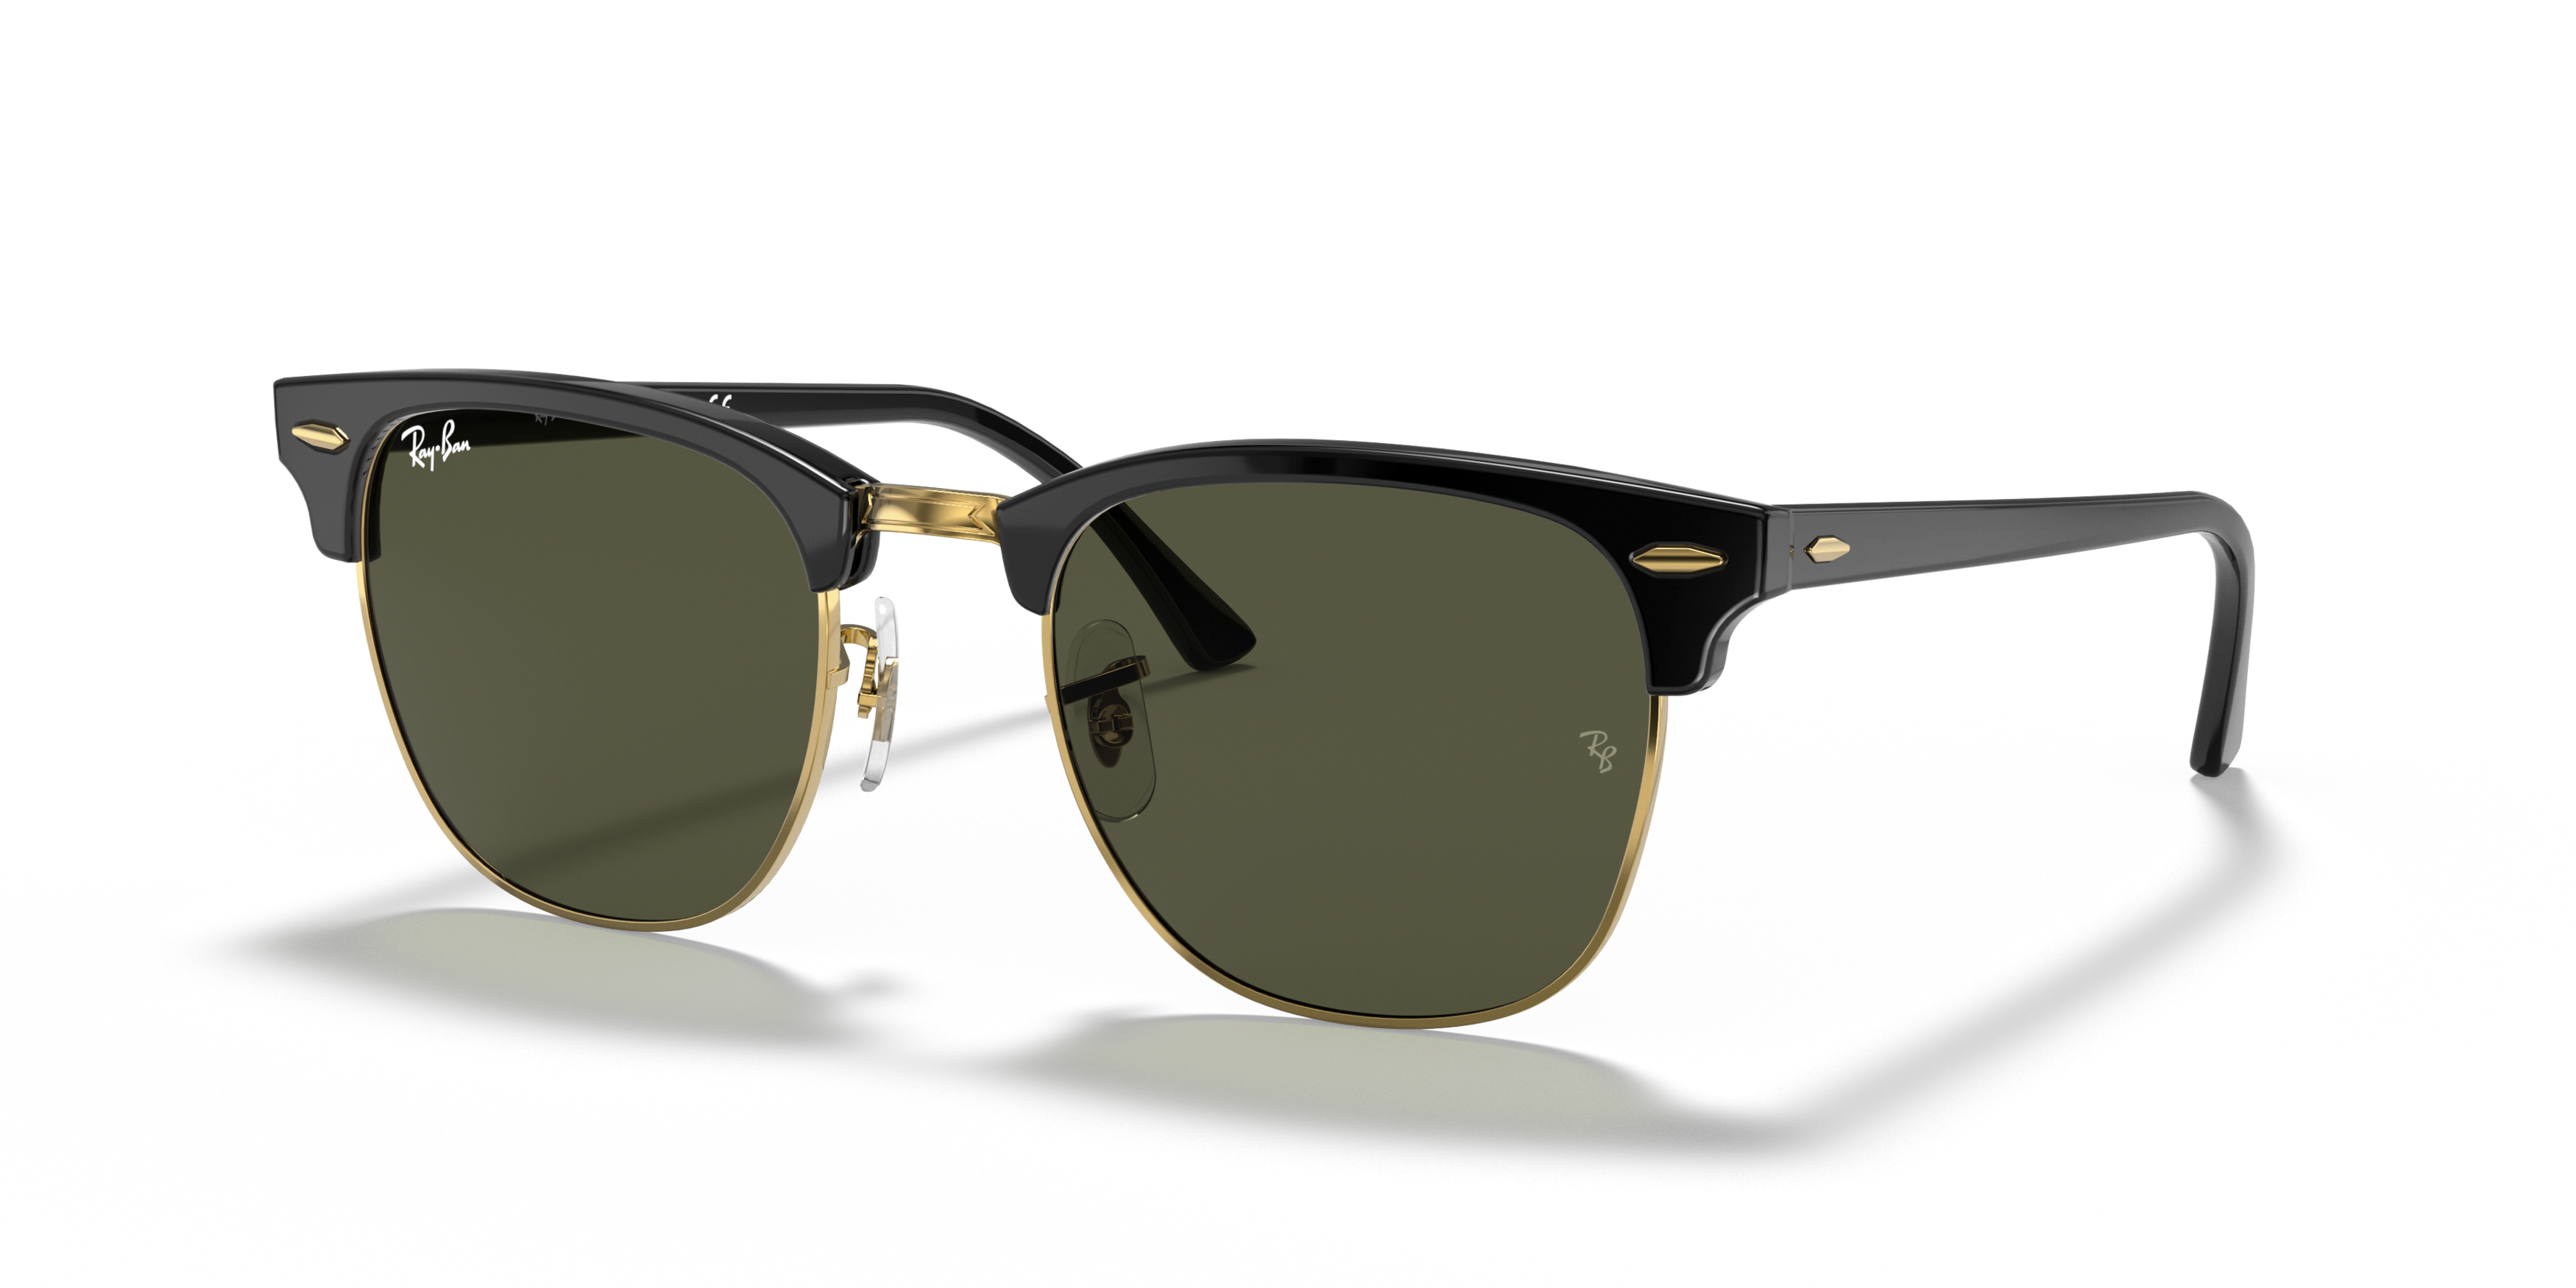 Angle_Left01 Ray-Ban Clubmaster RB 3016 Sunglasses Green / Black